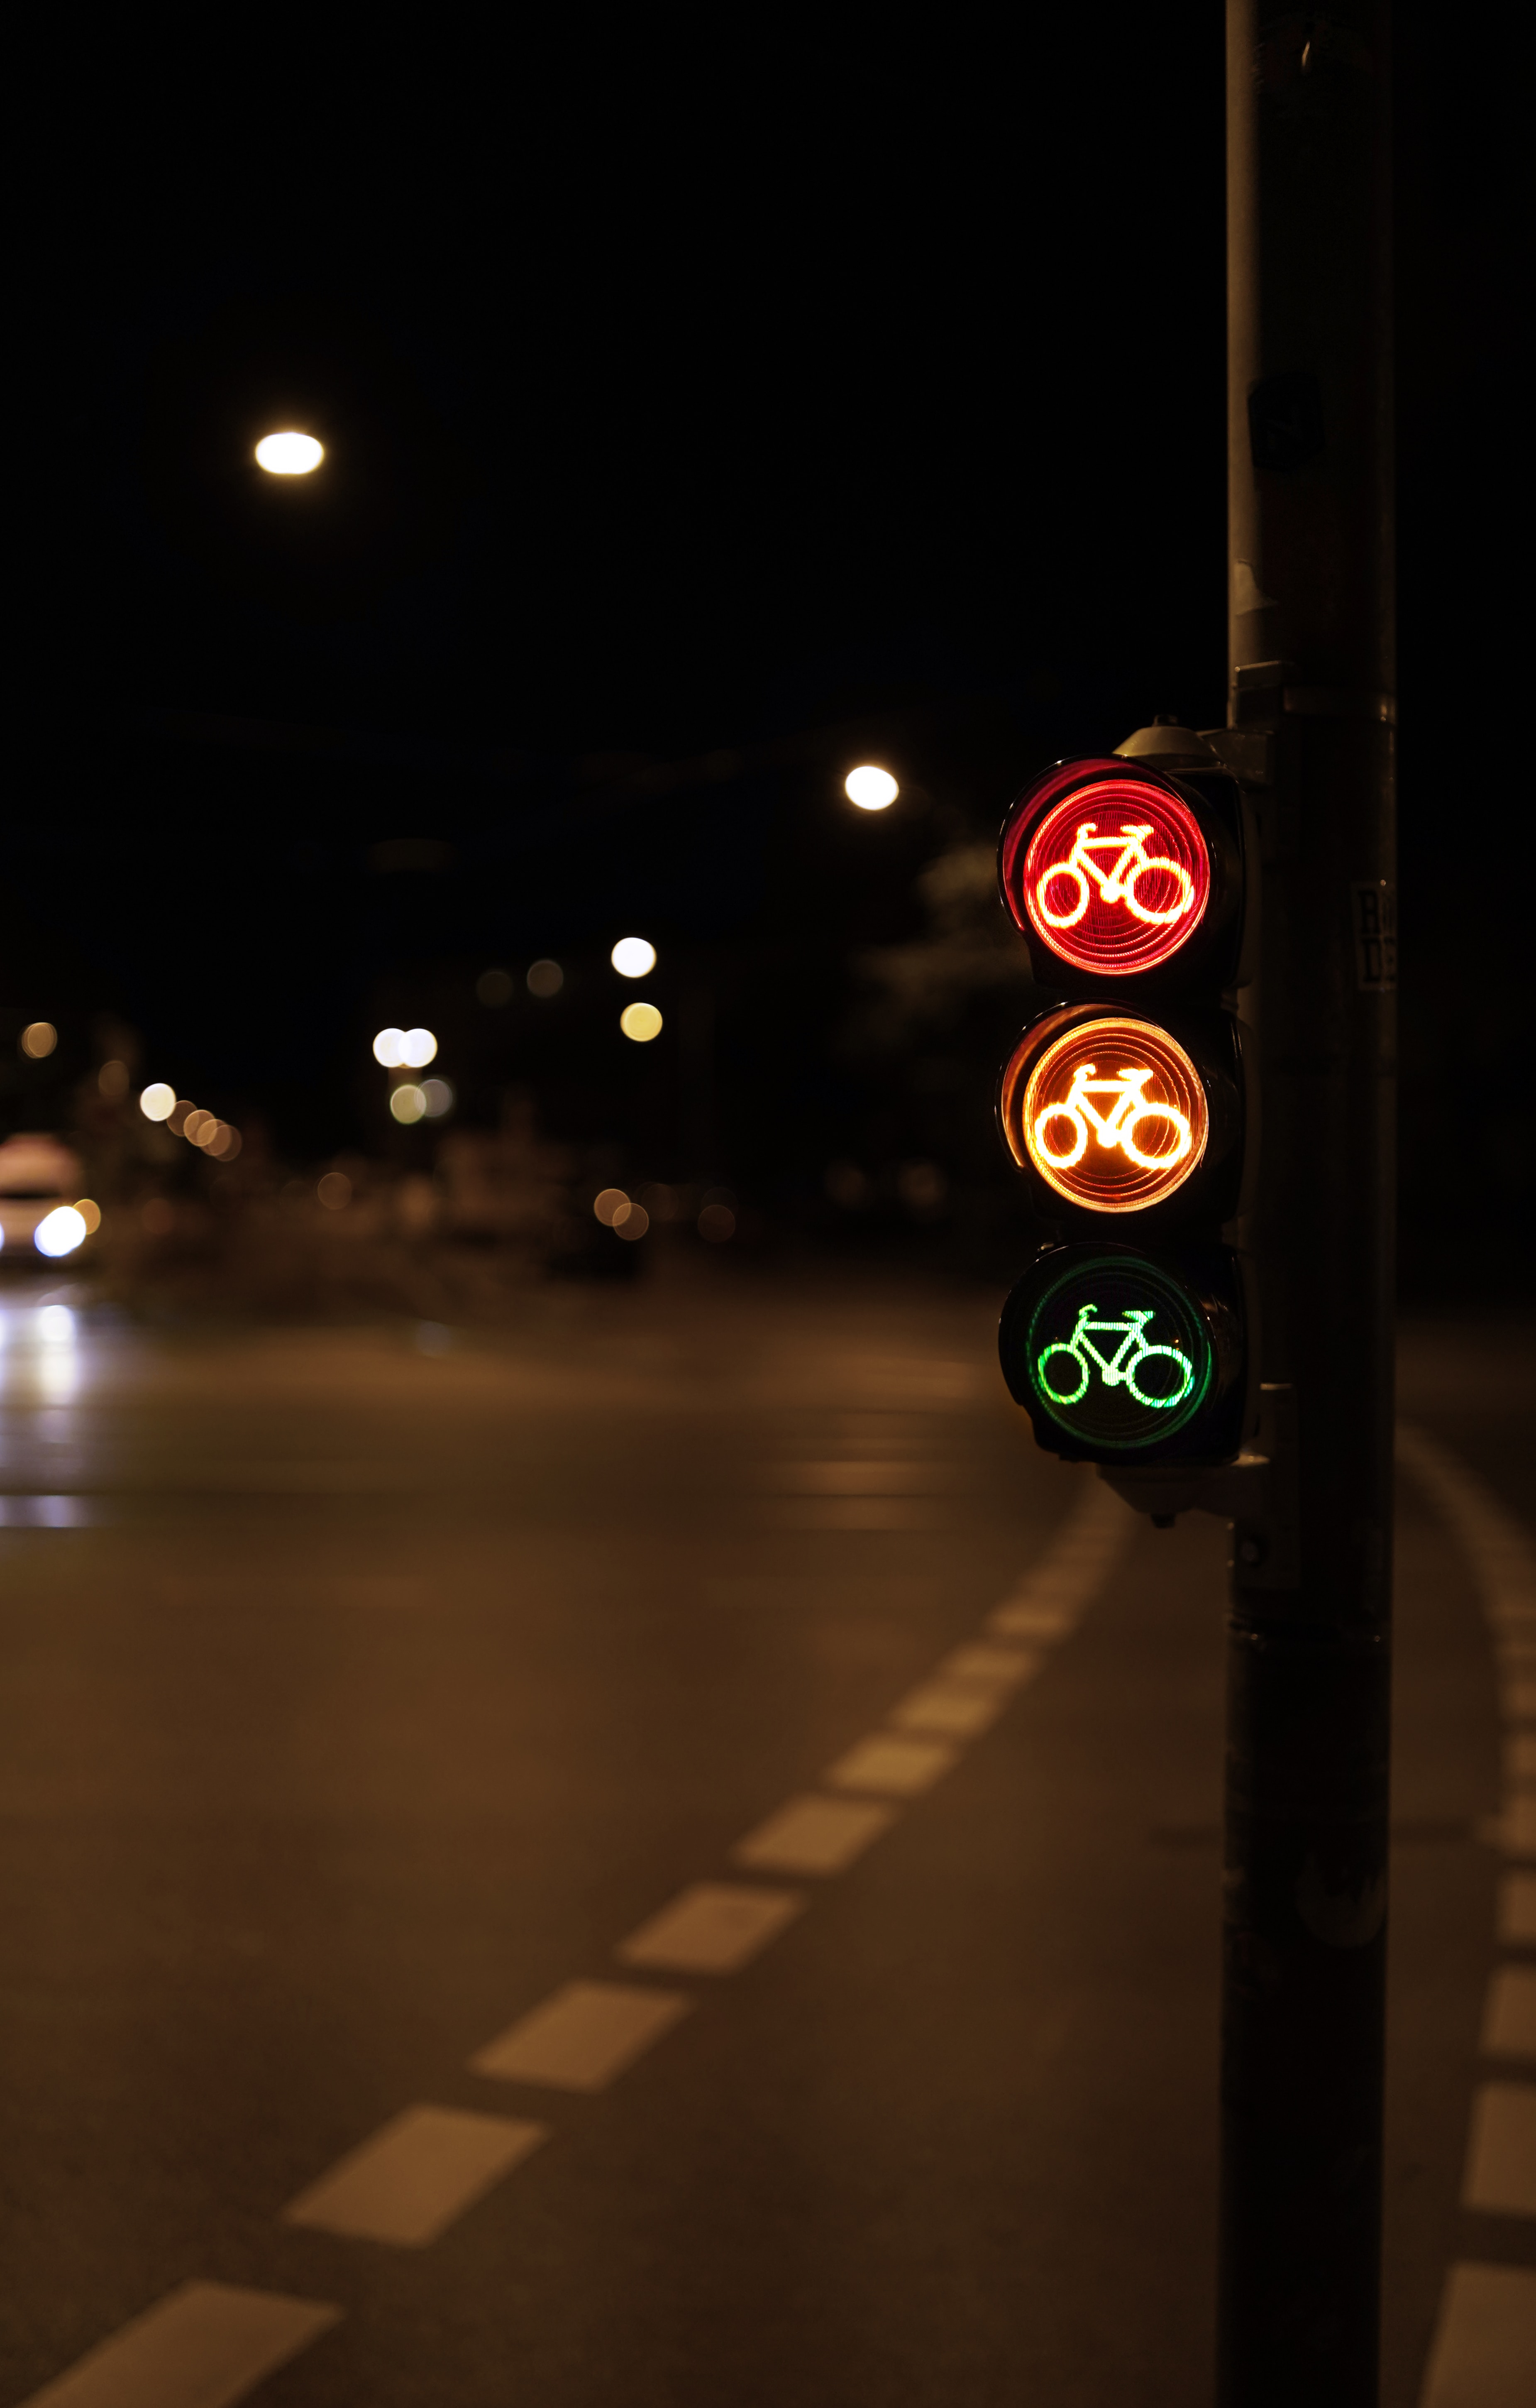 157809 Screensavers and Wallpapers Symbol for phone. Download night, miscellanea, miscellaneous, glow, symbol, bicycle, traffic light pictures for free